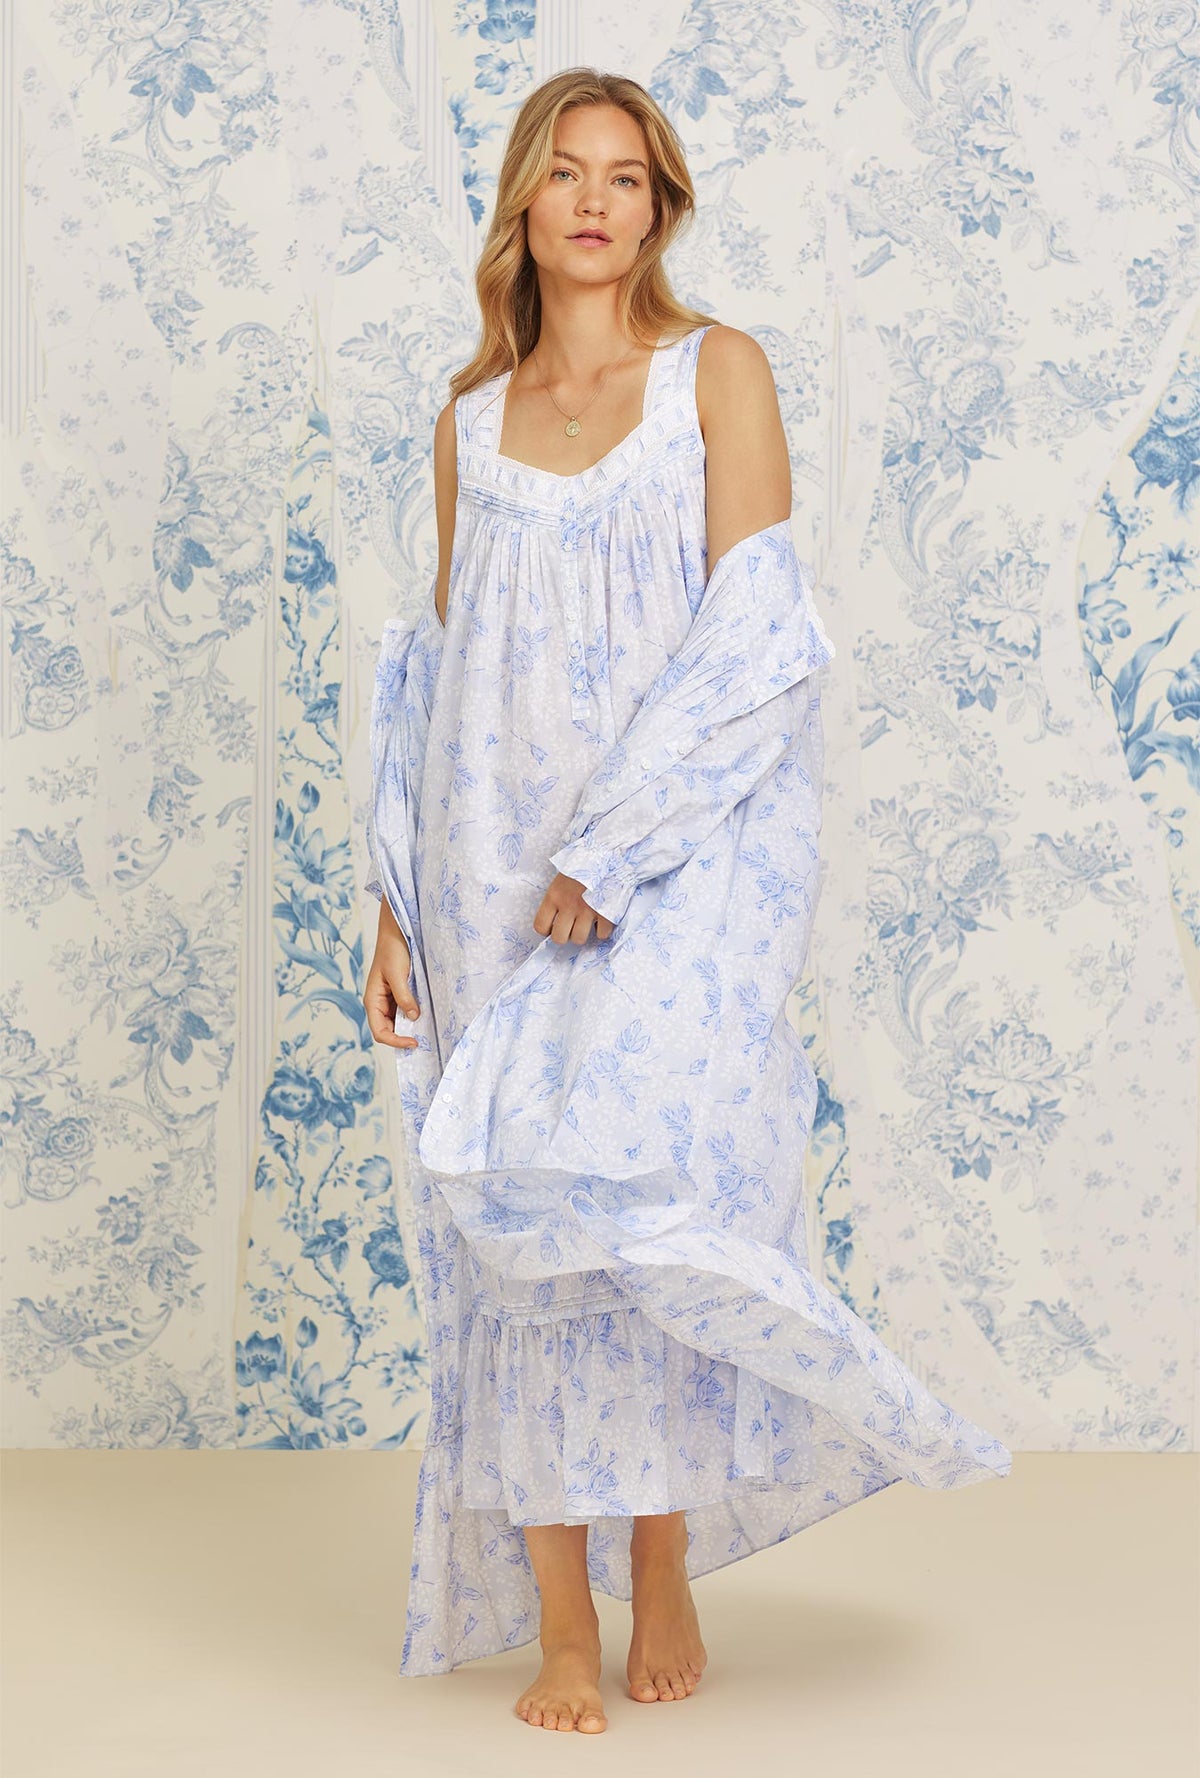 Laurel Canyon Roses Button Front Cotton Robe